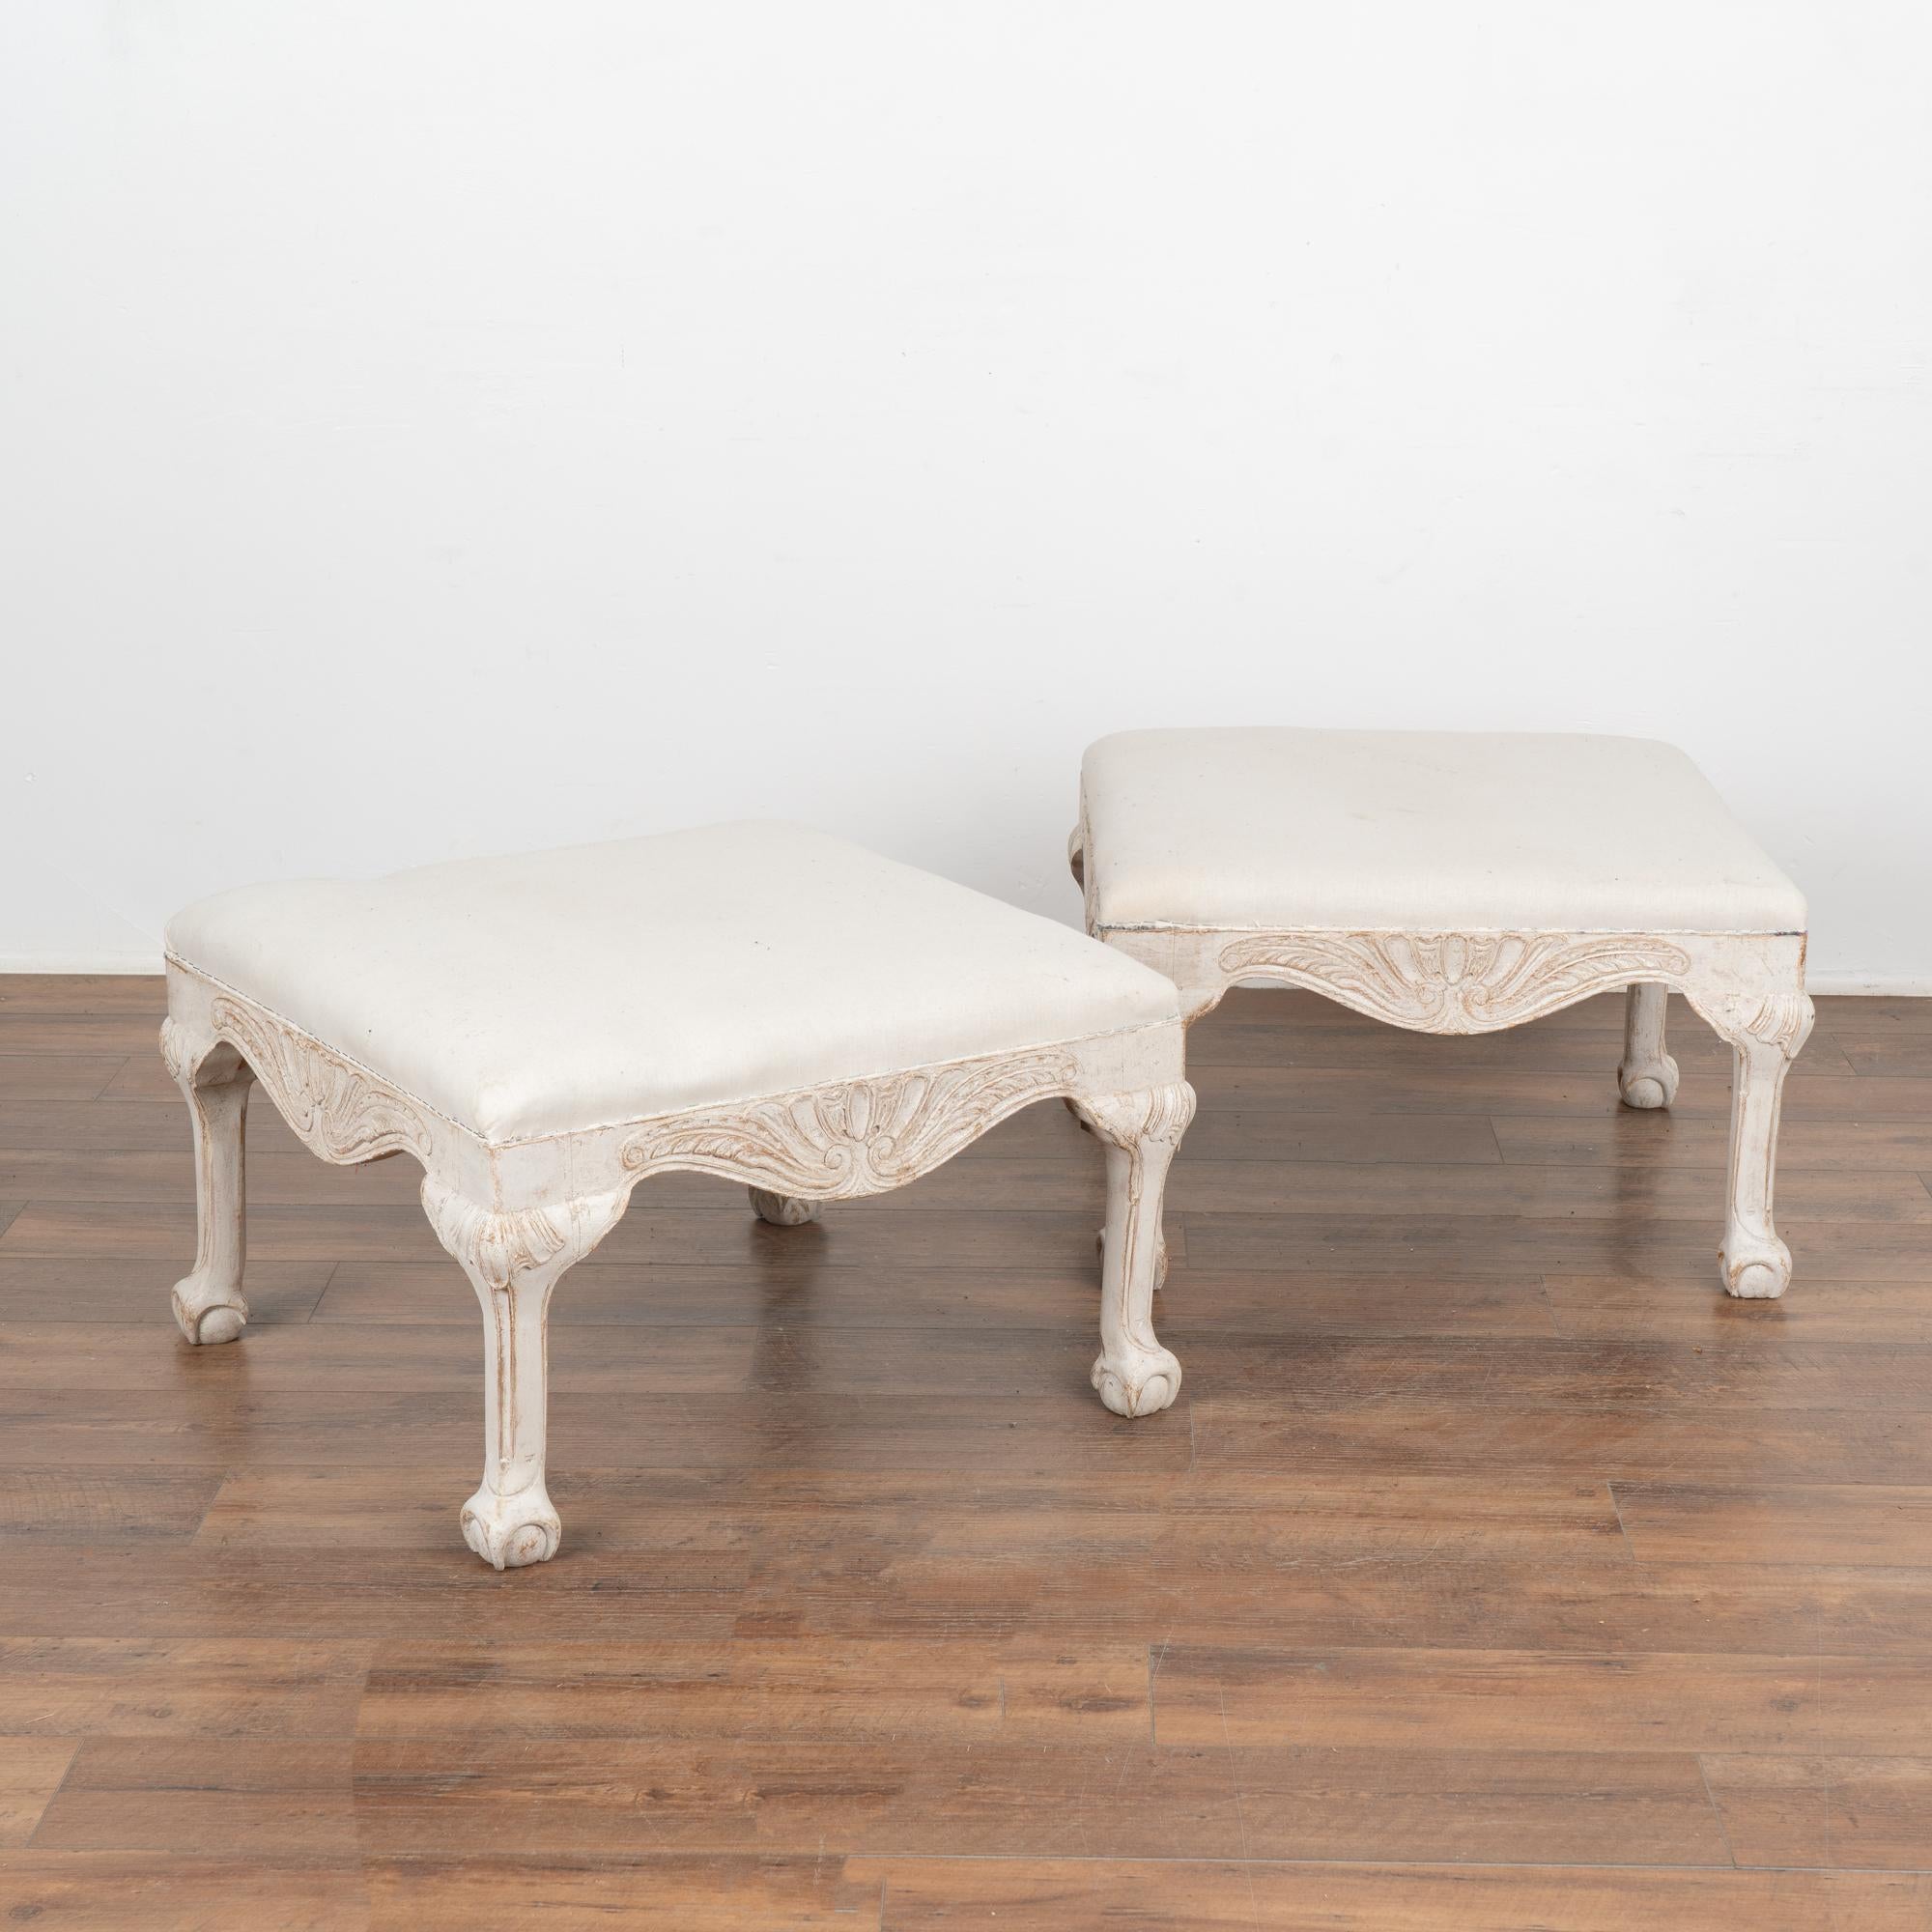 This lovely pair of Gustavian style Swedish stools are a special find due to their large size and square shape. They each rest on carved legs with ball and claw feet while intricate carving along the skirt also adds an elegant touch to the